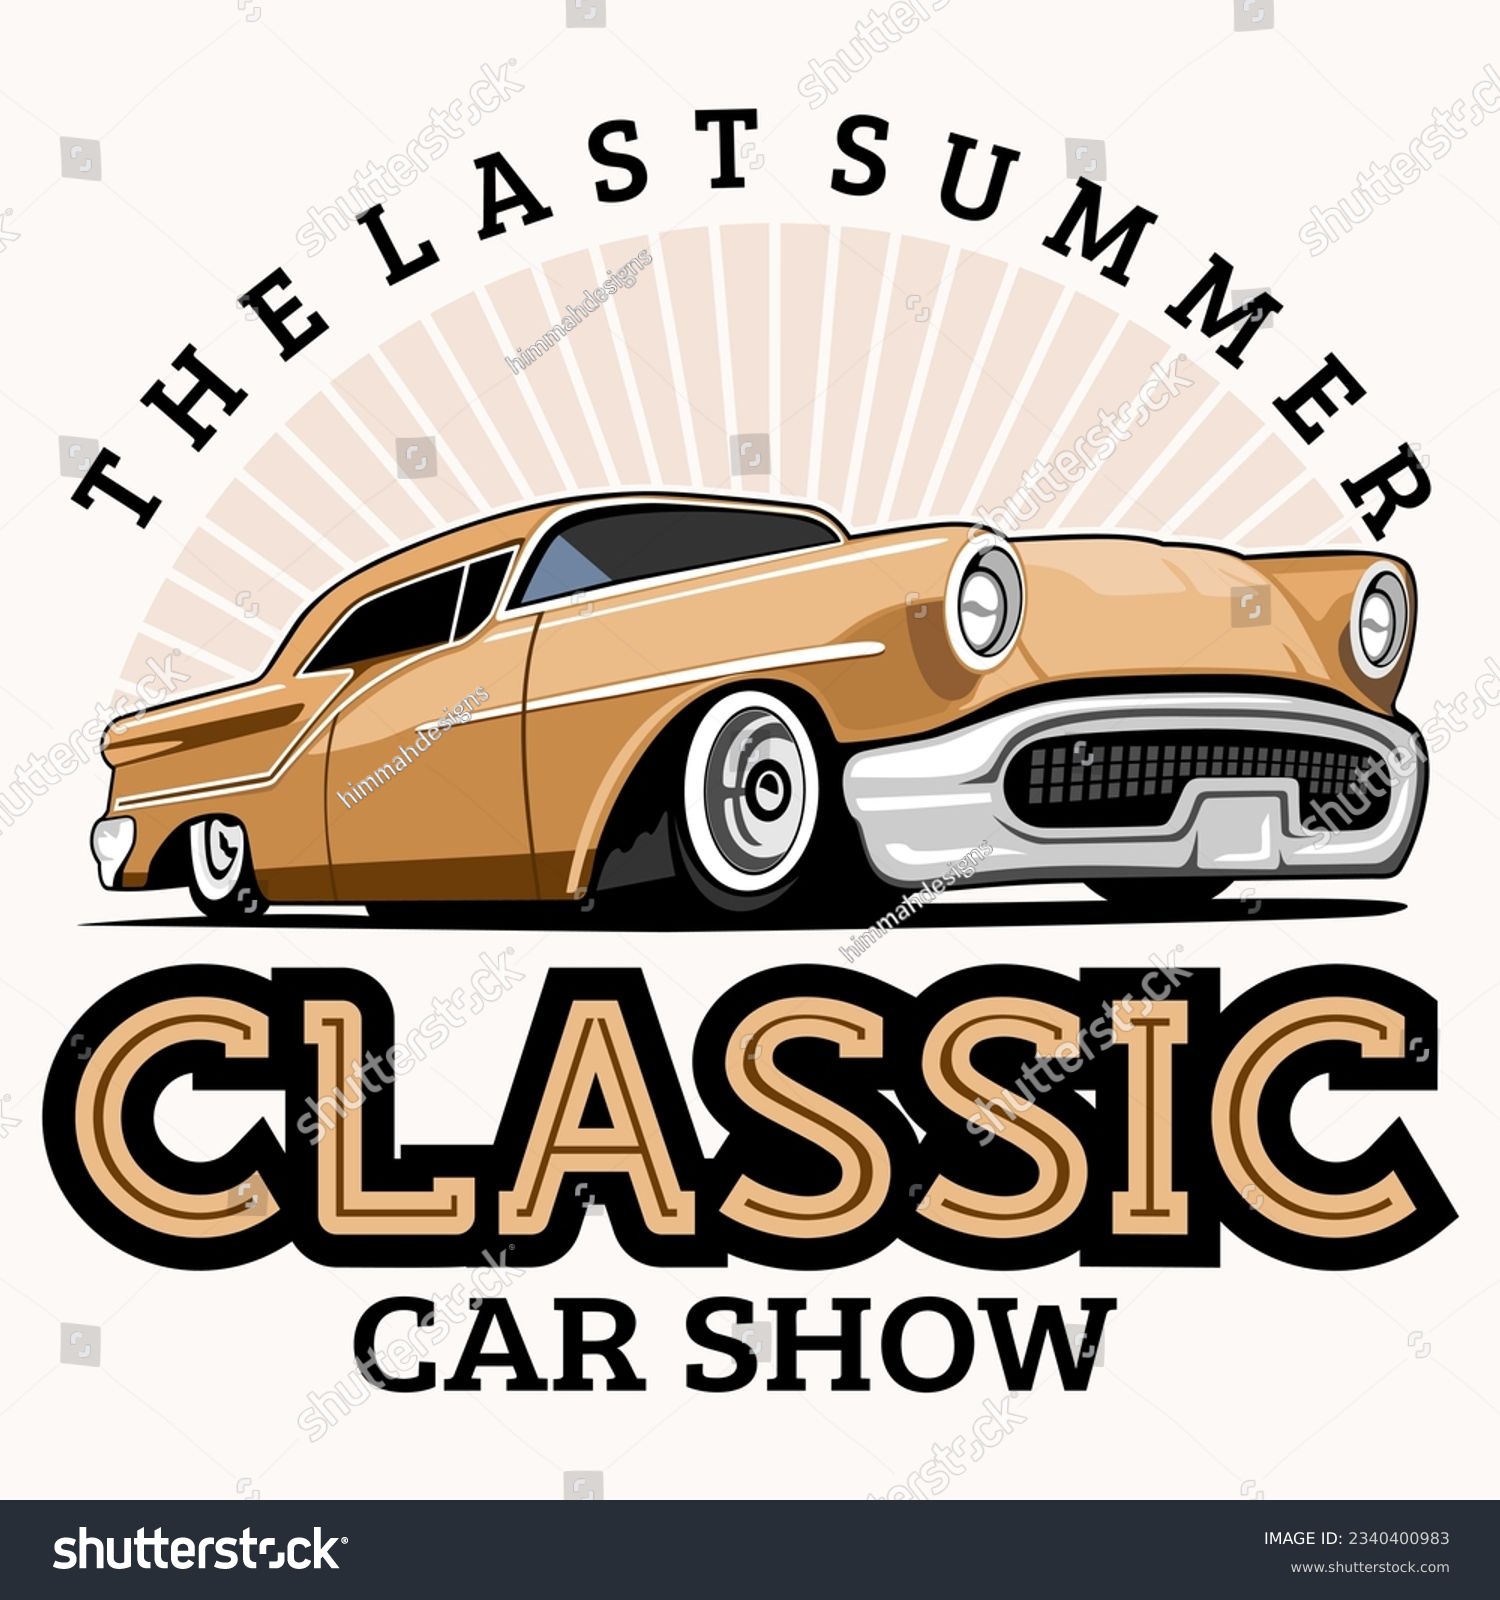 SVG of classic car show party logo design icon vector	
 svg